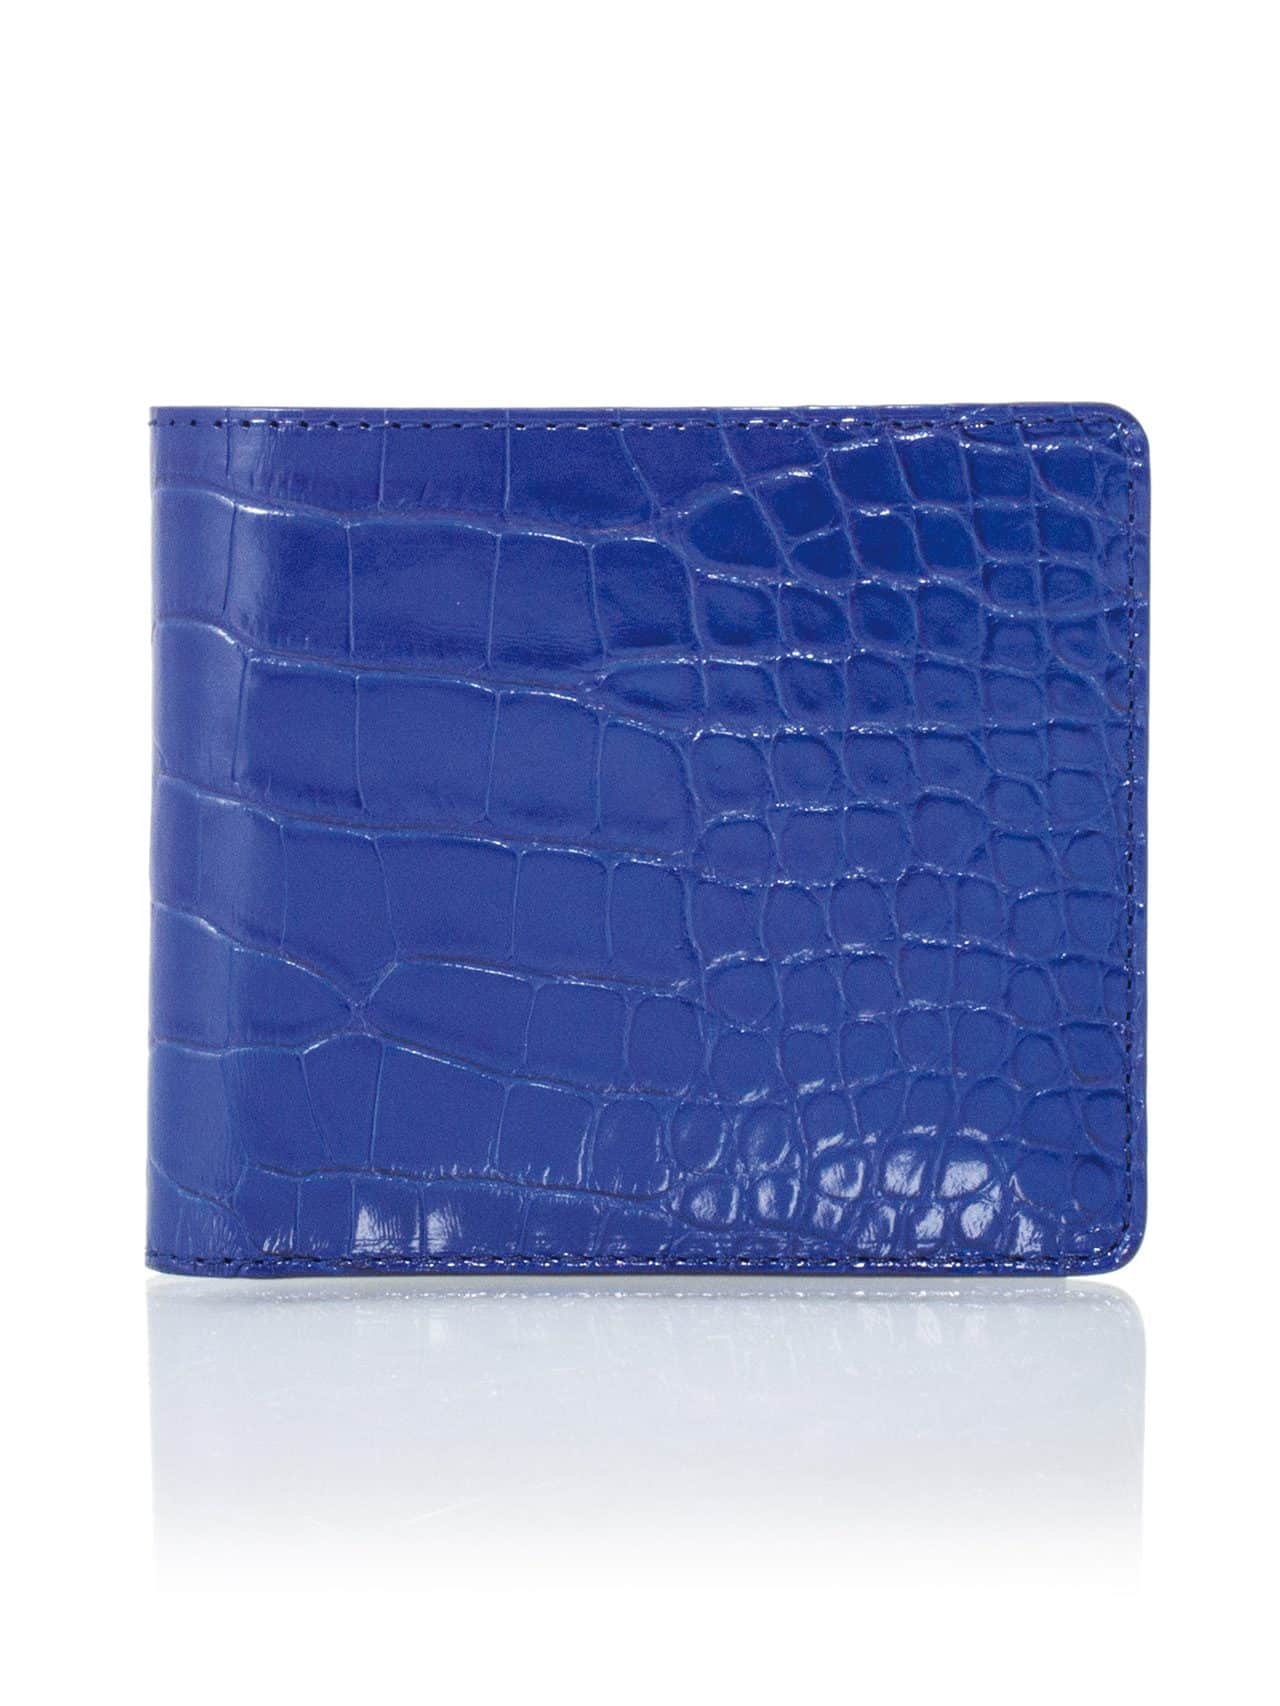 Shoulder Bag Pu Leather IMARS Croco crossbody blue for girls, 0.400 G,  Size: Medium at Rs 899 in Sonipat